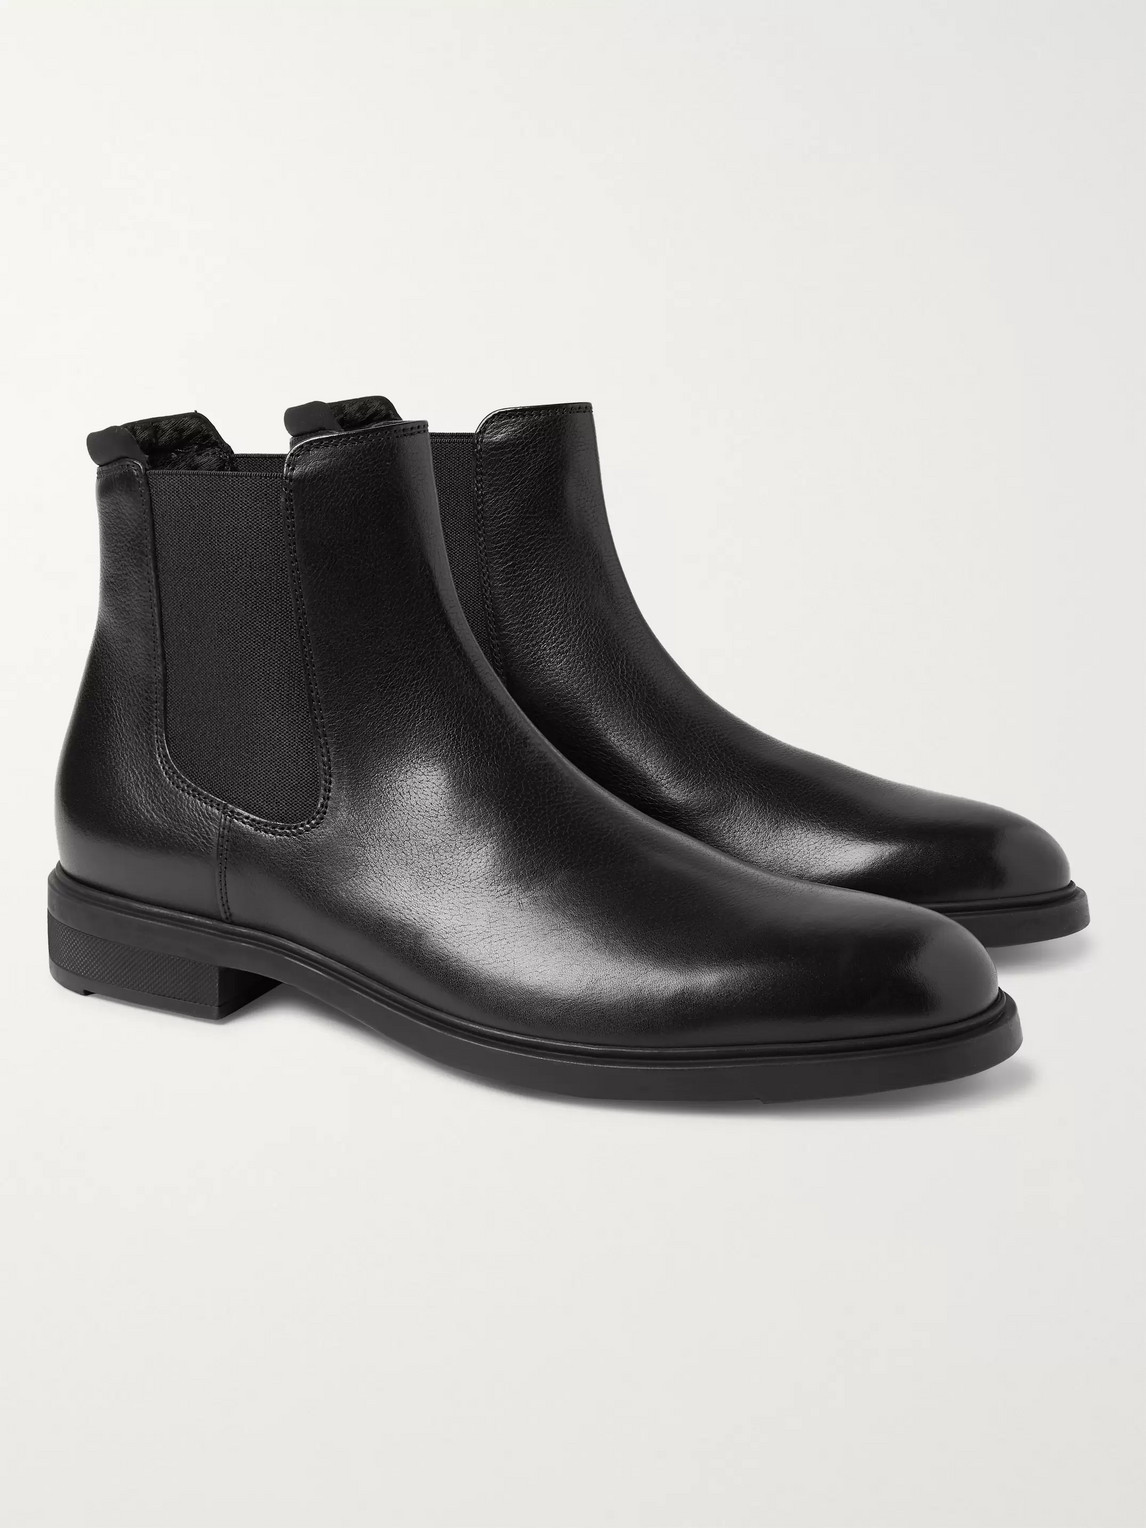 HUGO BOSS FIRST CLASS LEATHER CHELSEA BOOT